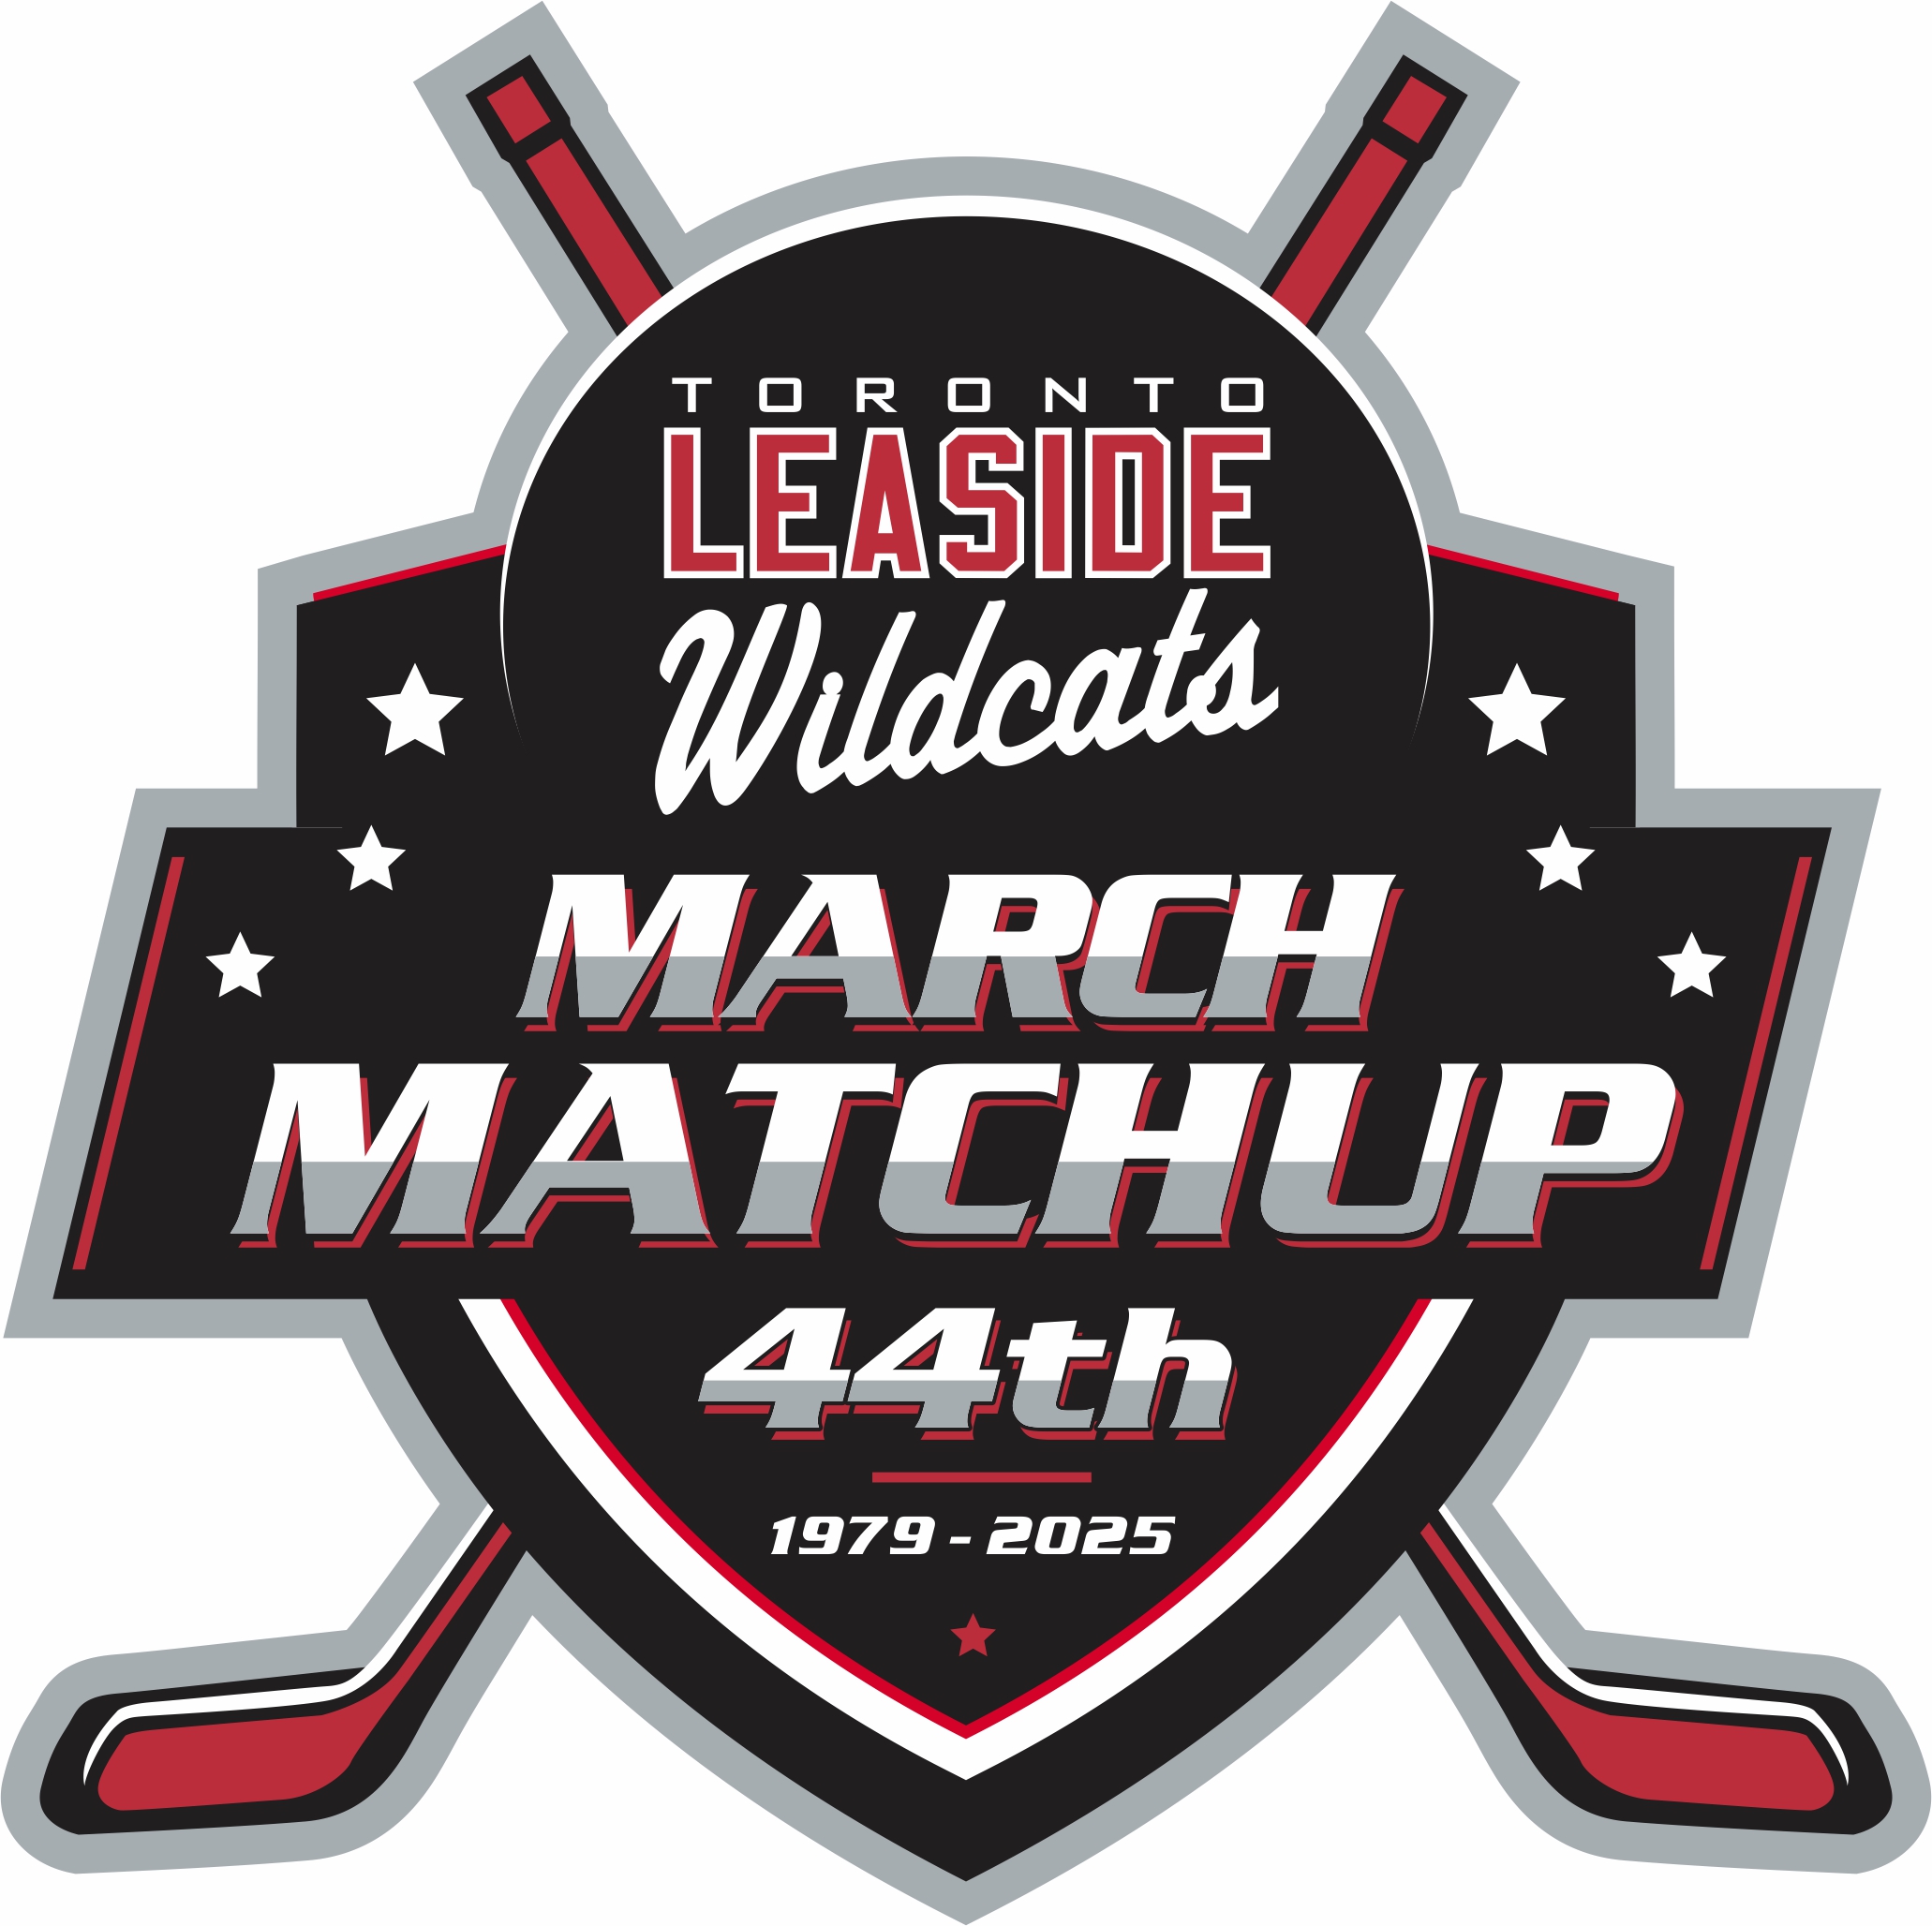 TORONTO LEASIDE WILDCATS MARCH MATCHUP 2025